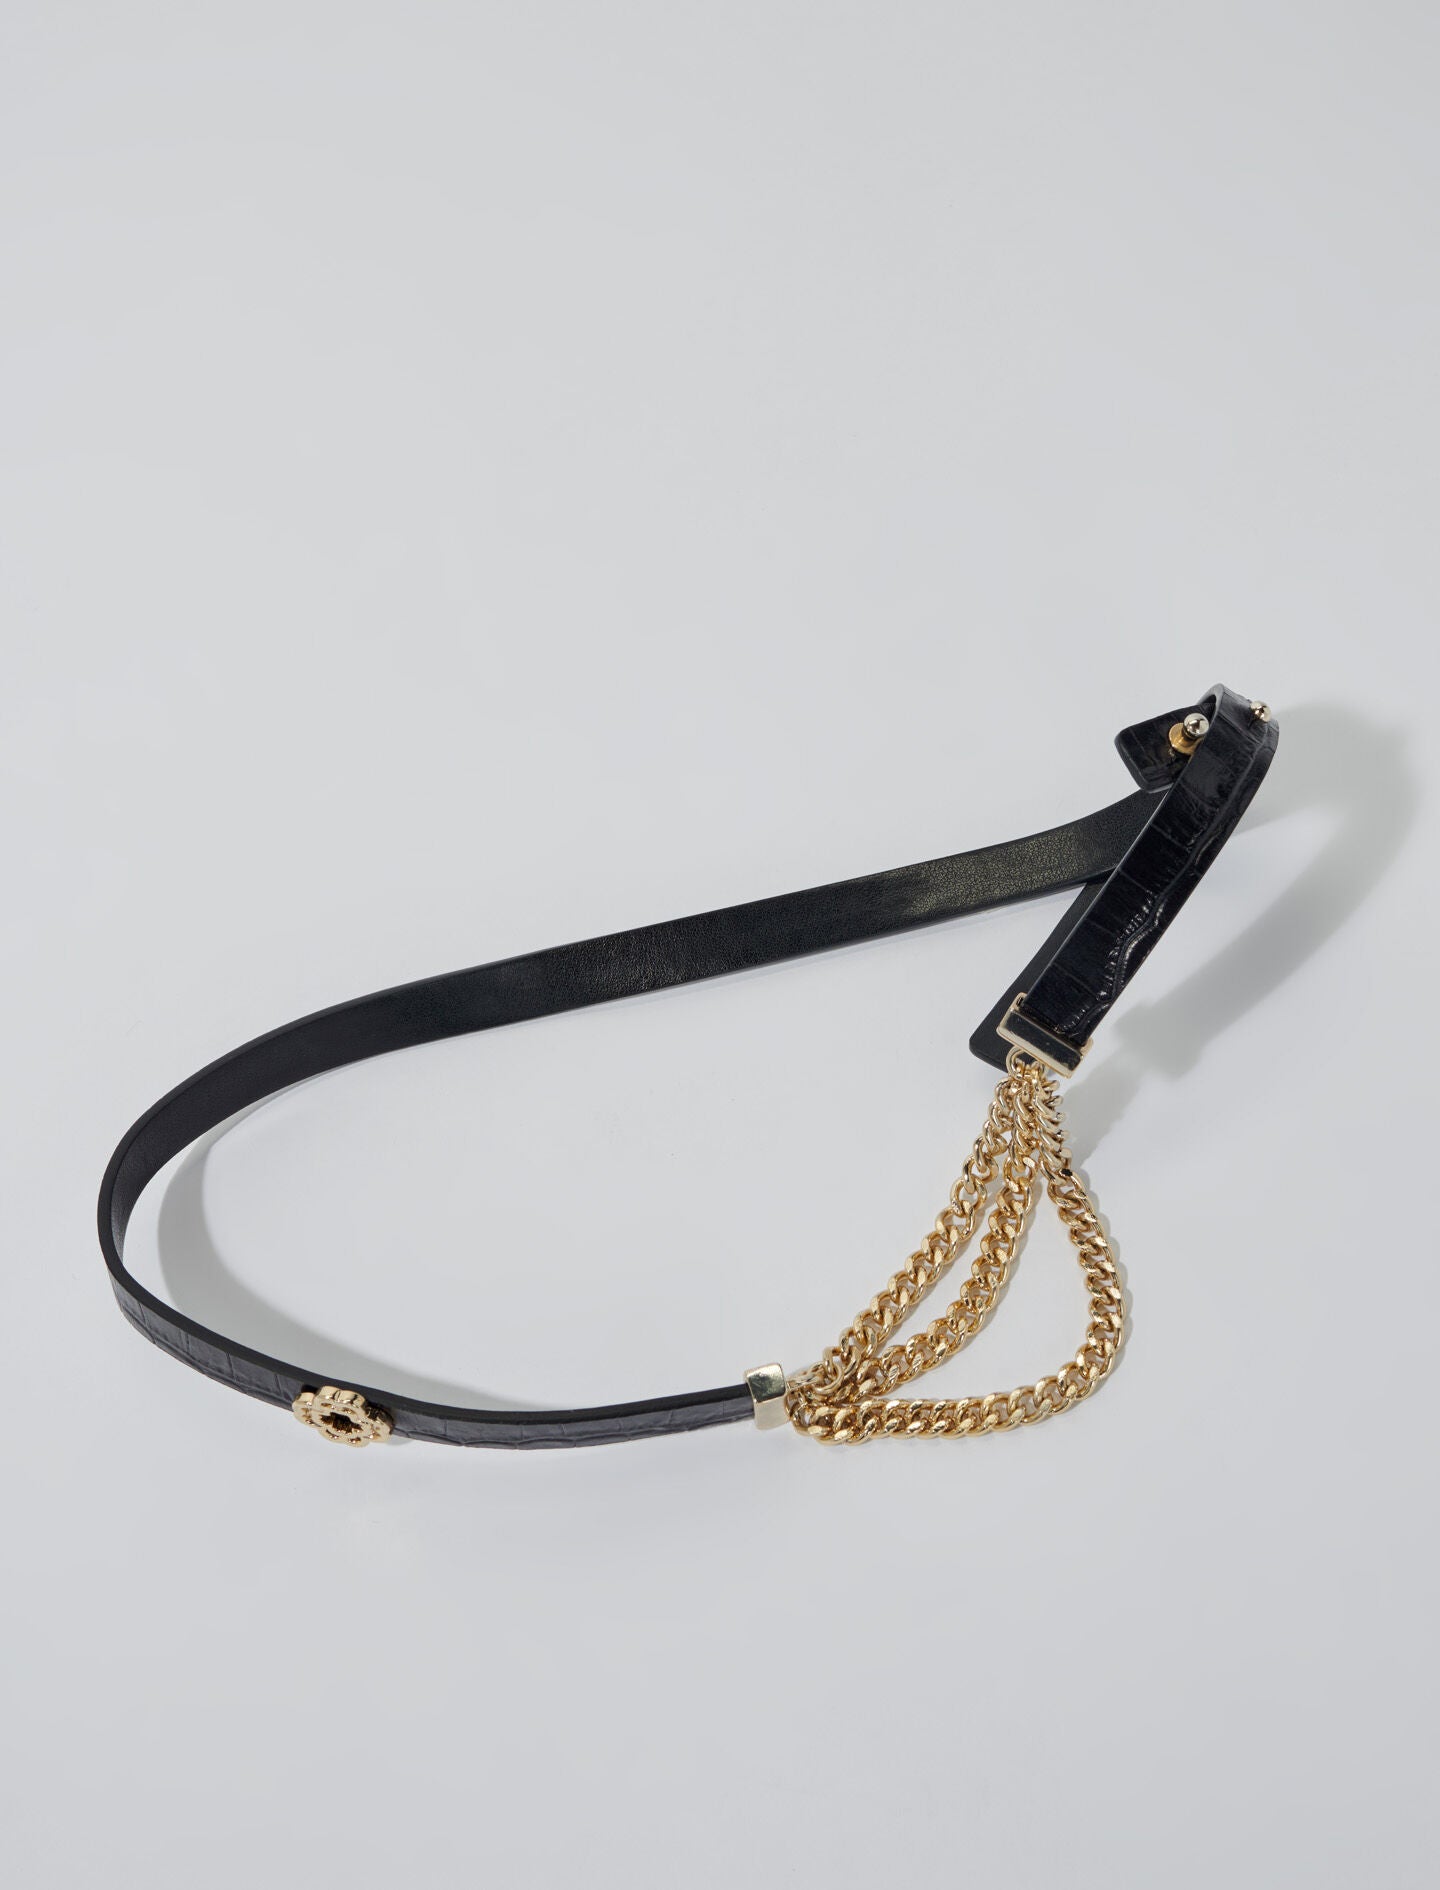 Black-clover leather and chain belt